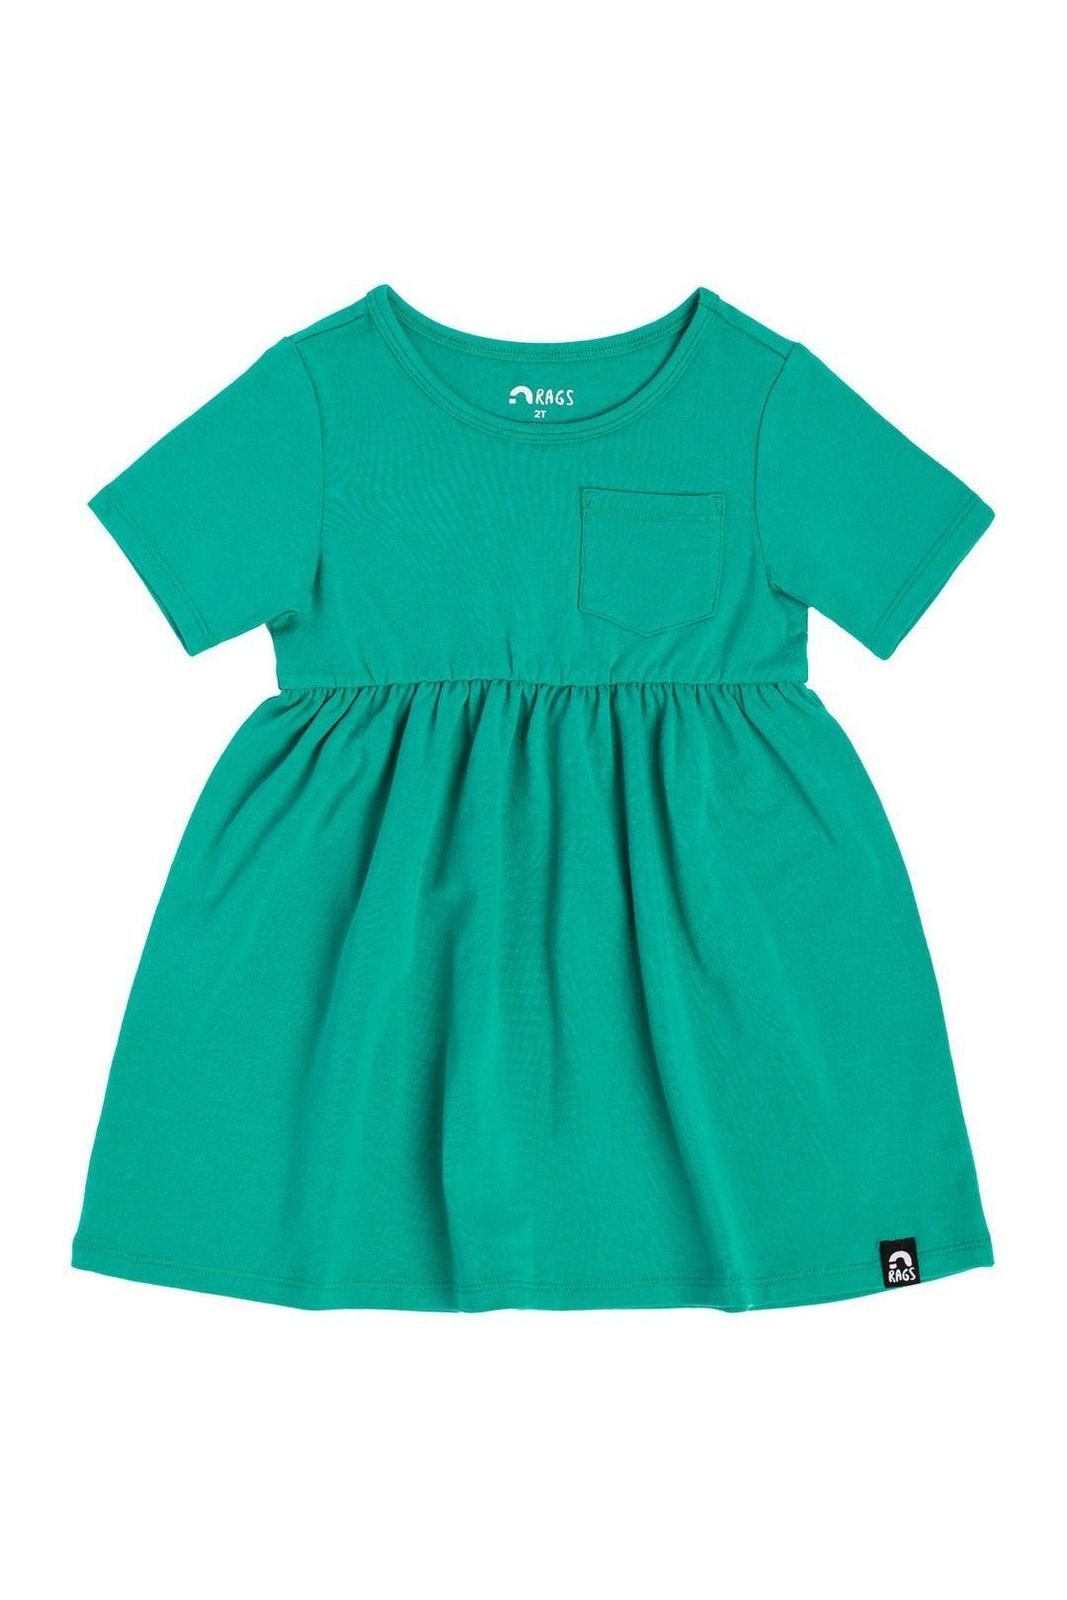 Essentials Short Sleeve with Chest Pocket Dress - 'Teal' - Tea for Three: A Children's Boutique-New Arrivals-Tea for Three: A Children's Boutique